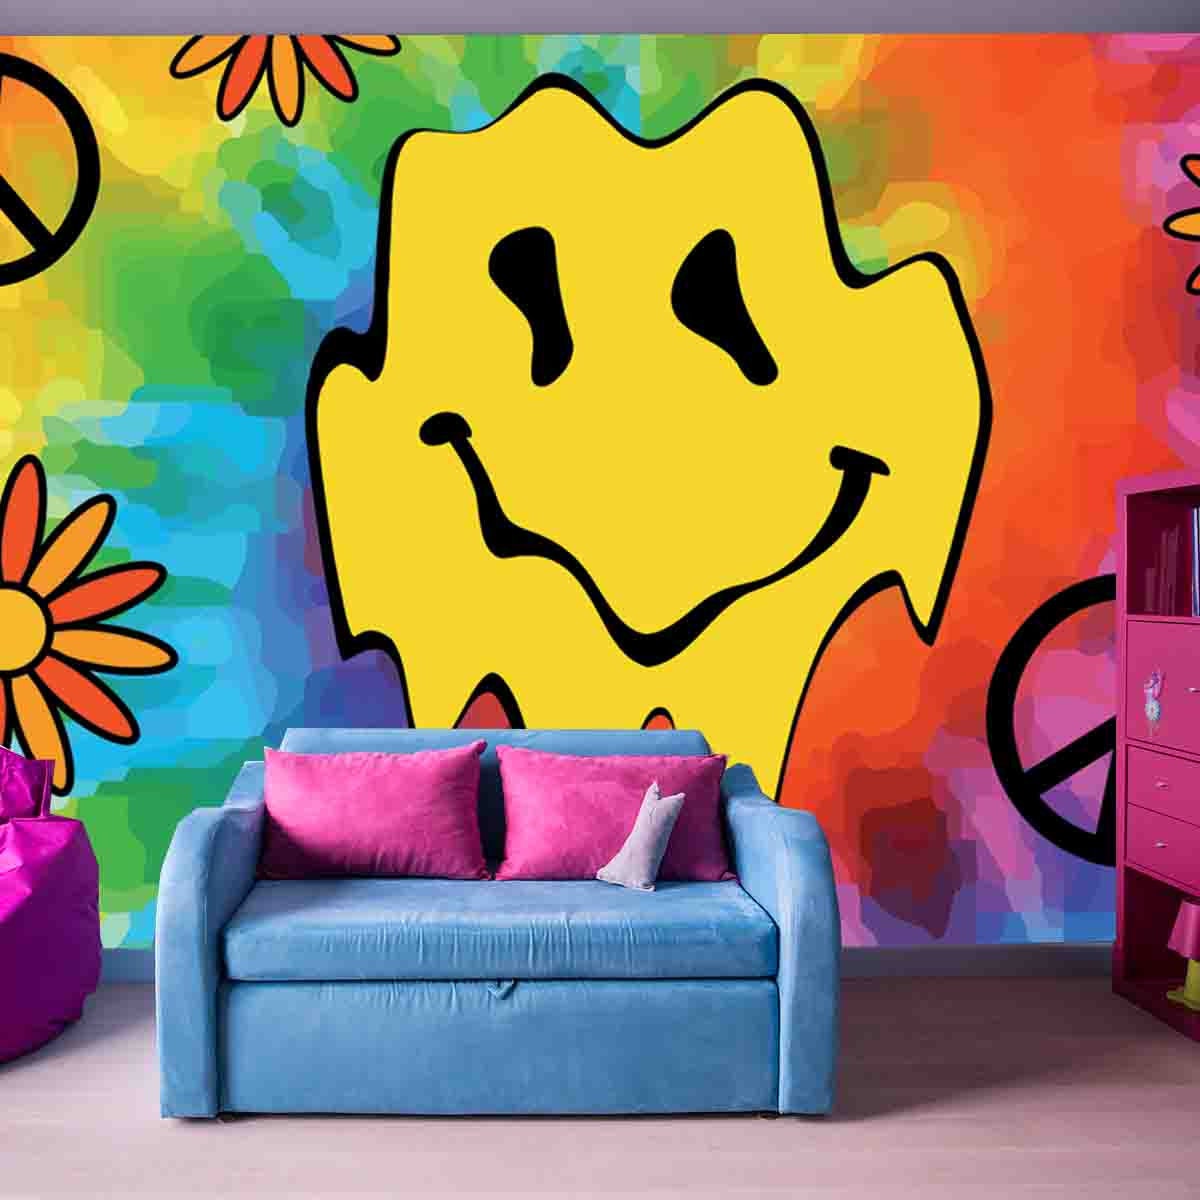 70s Retro Groovy Smiley Face Illustration with Rainbow Background Wallpaper Girls Bedroom Mural